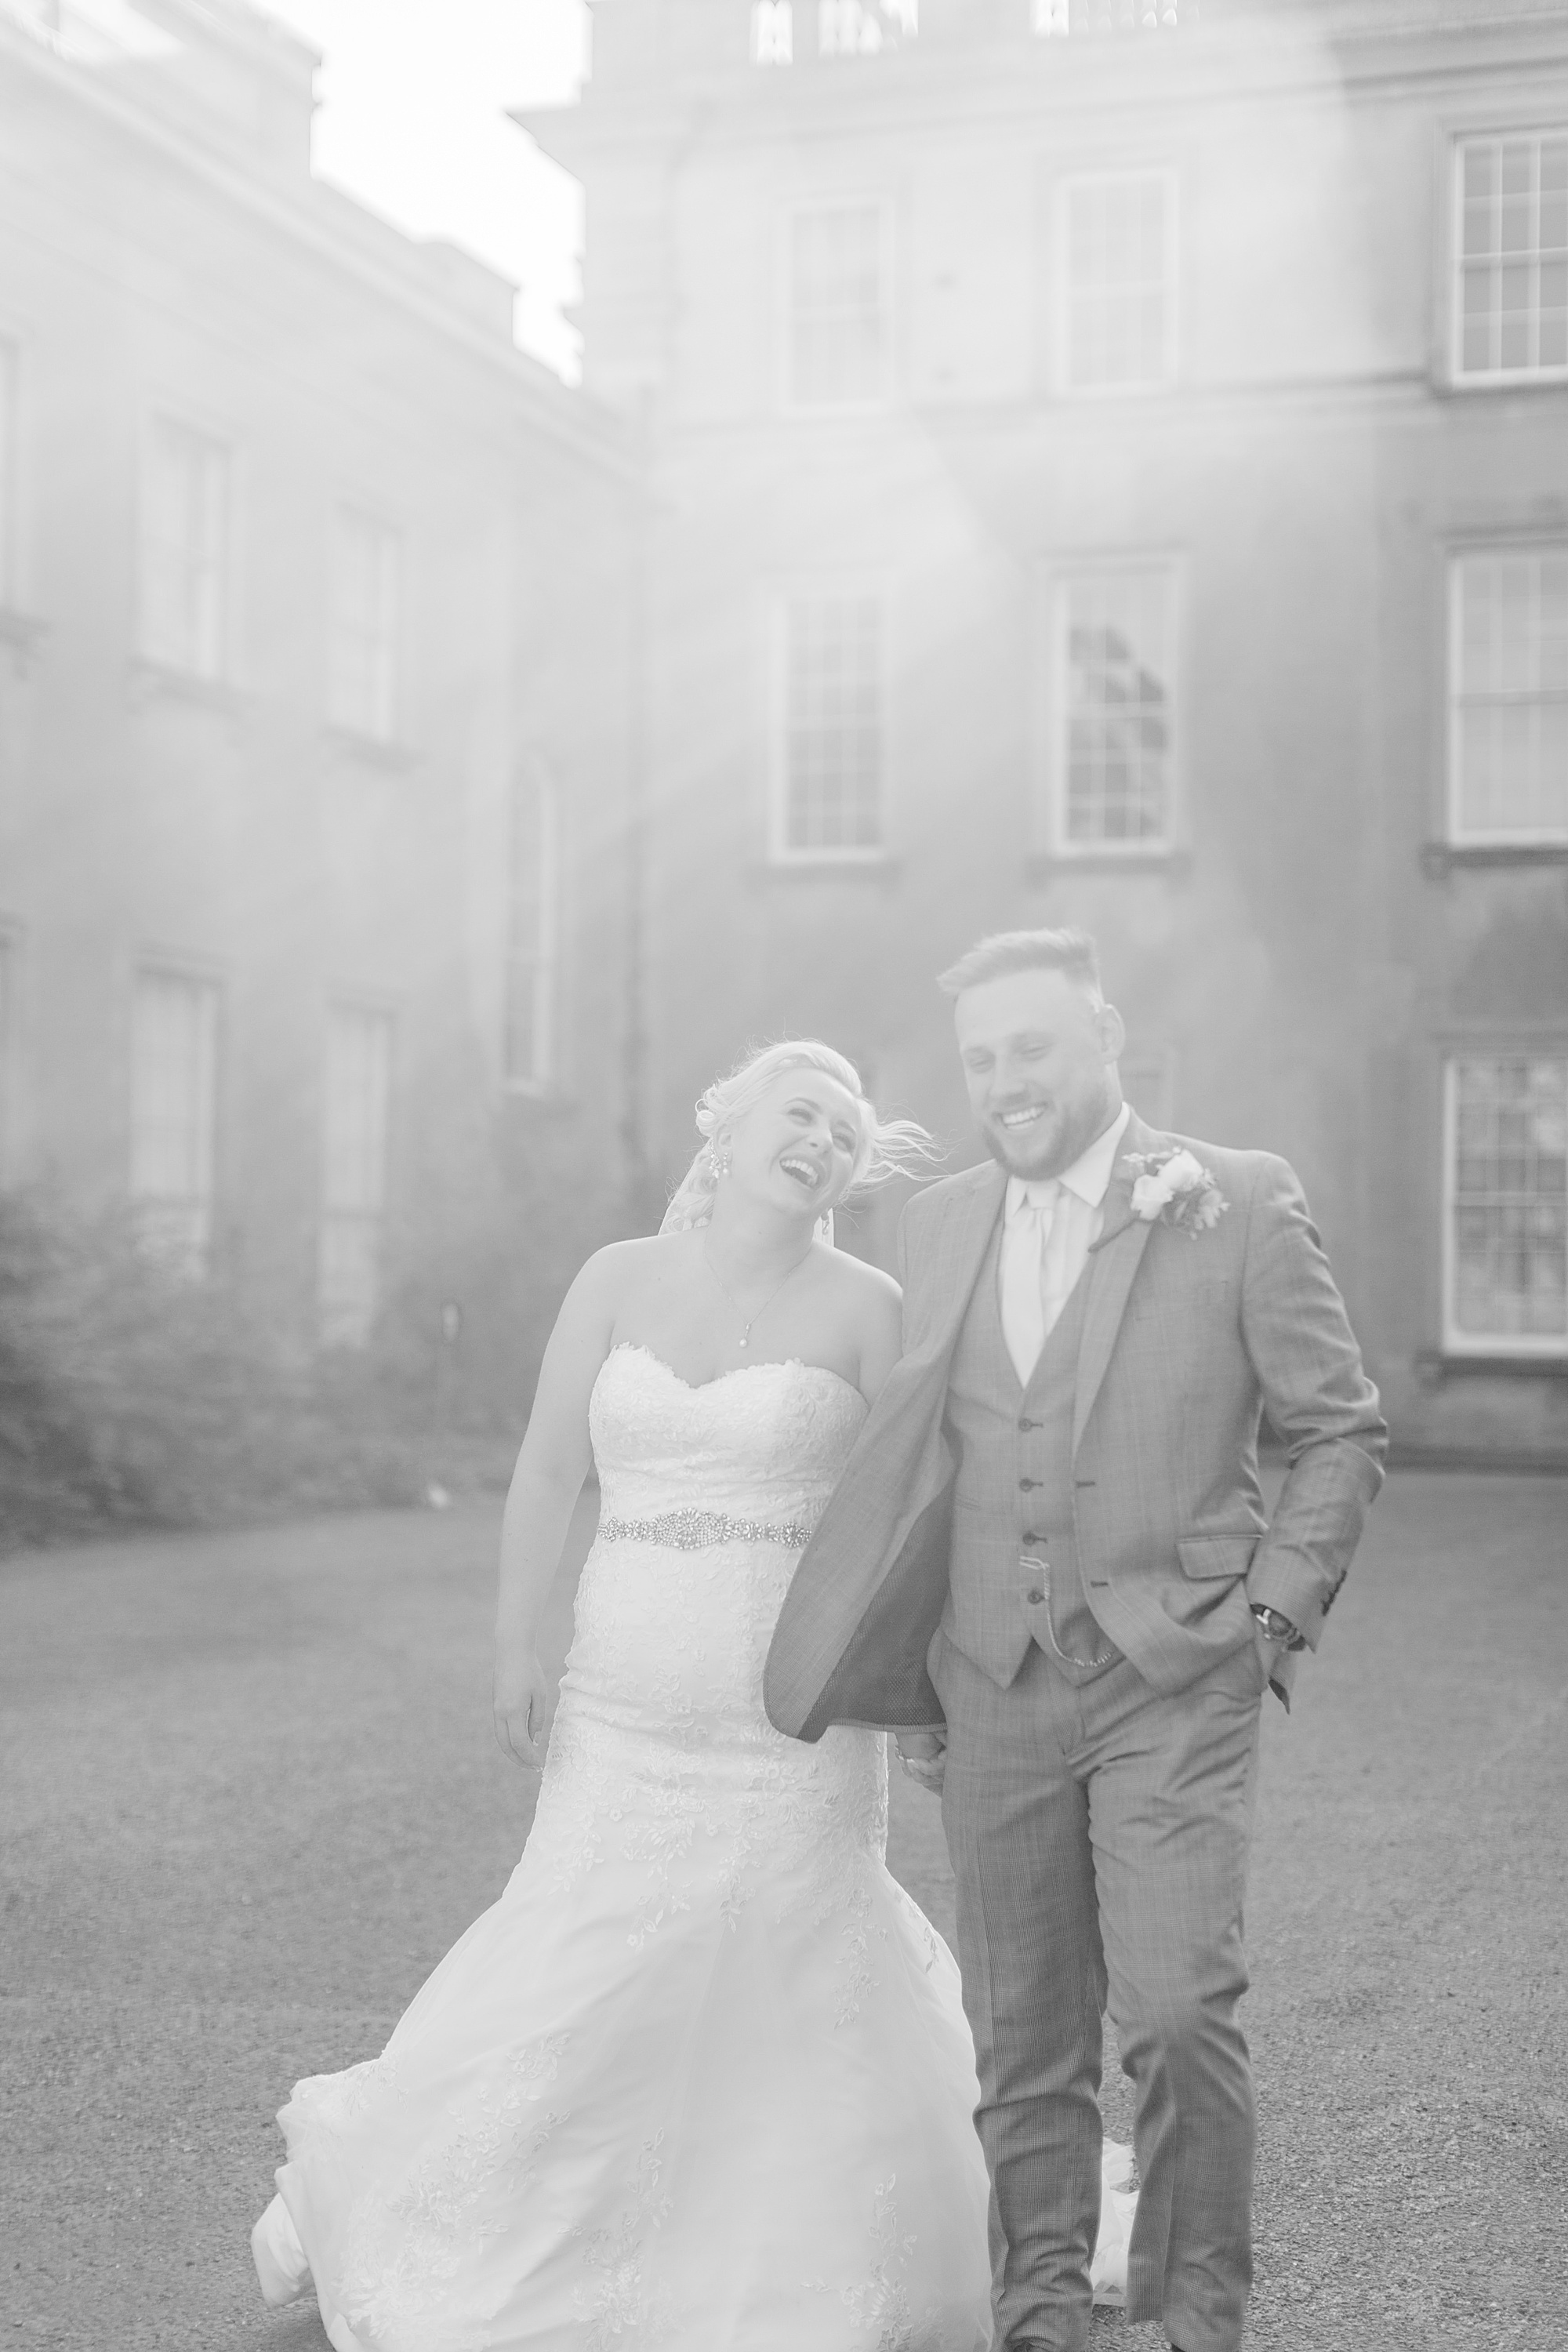 bride and groom walking with himley hall behind them and the sunset and soft lighting and glare from the sun in the image behind them too